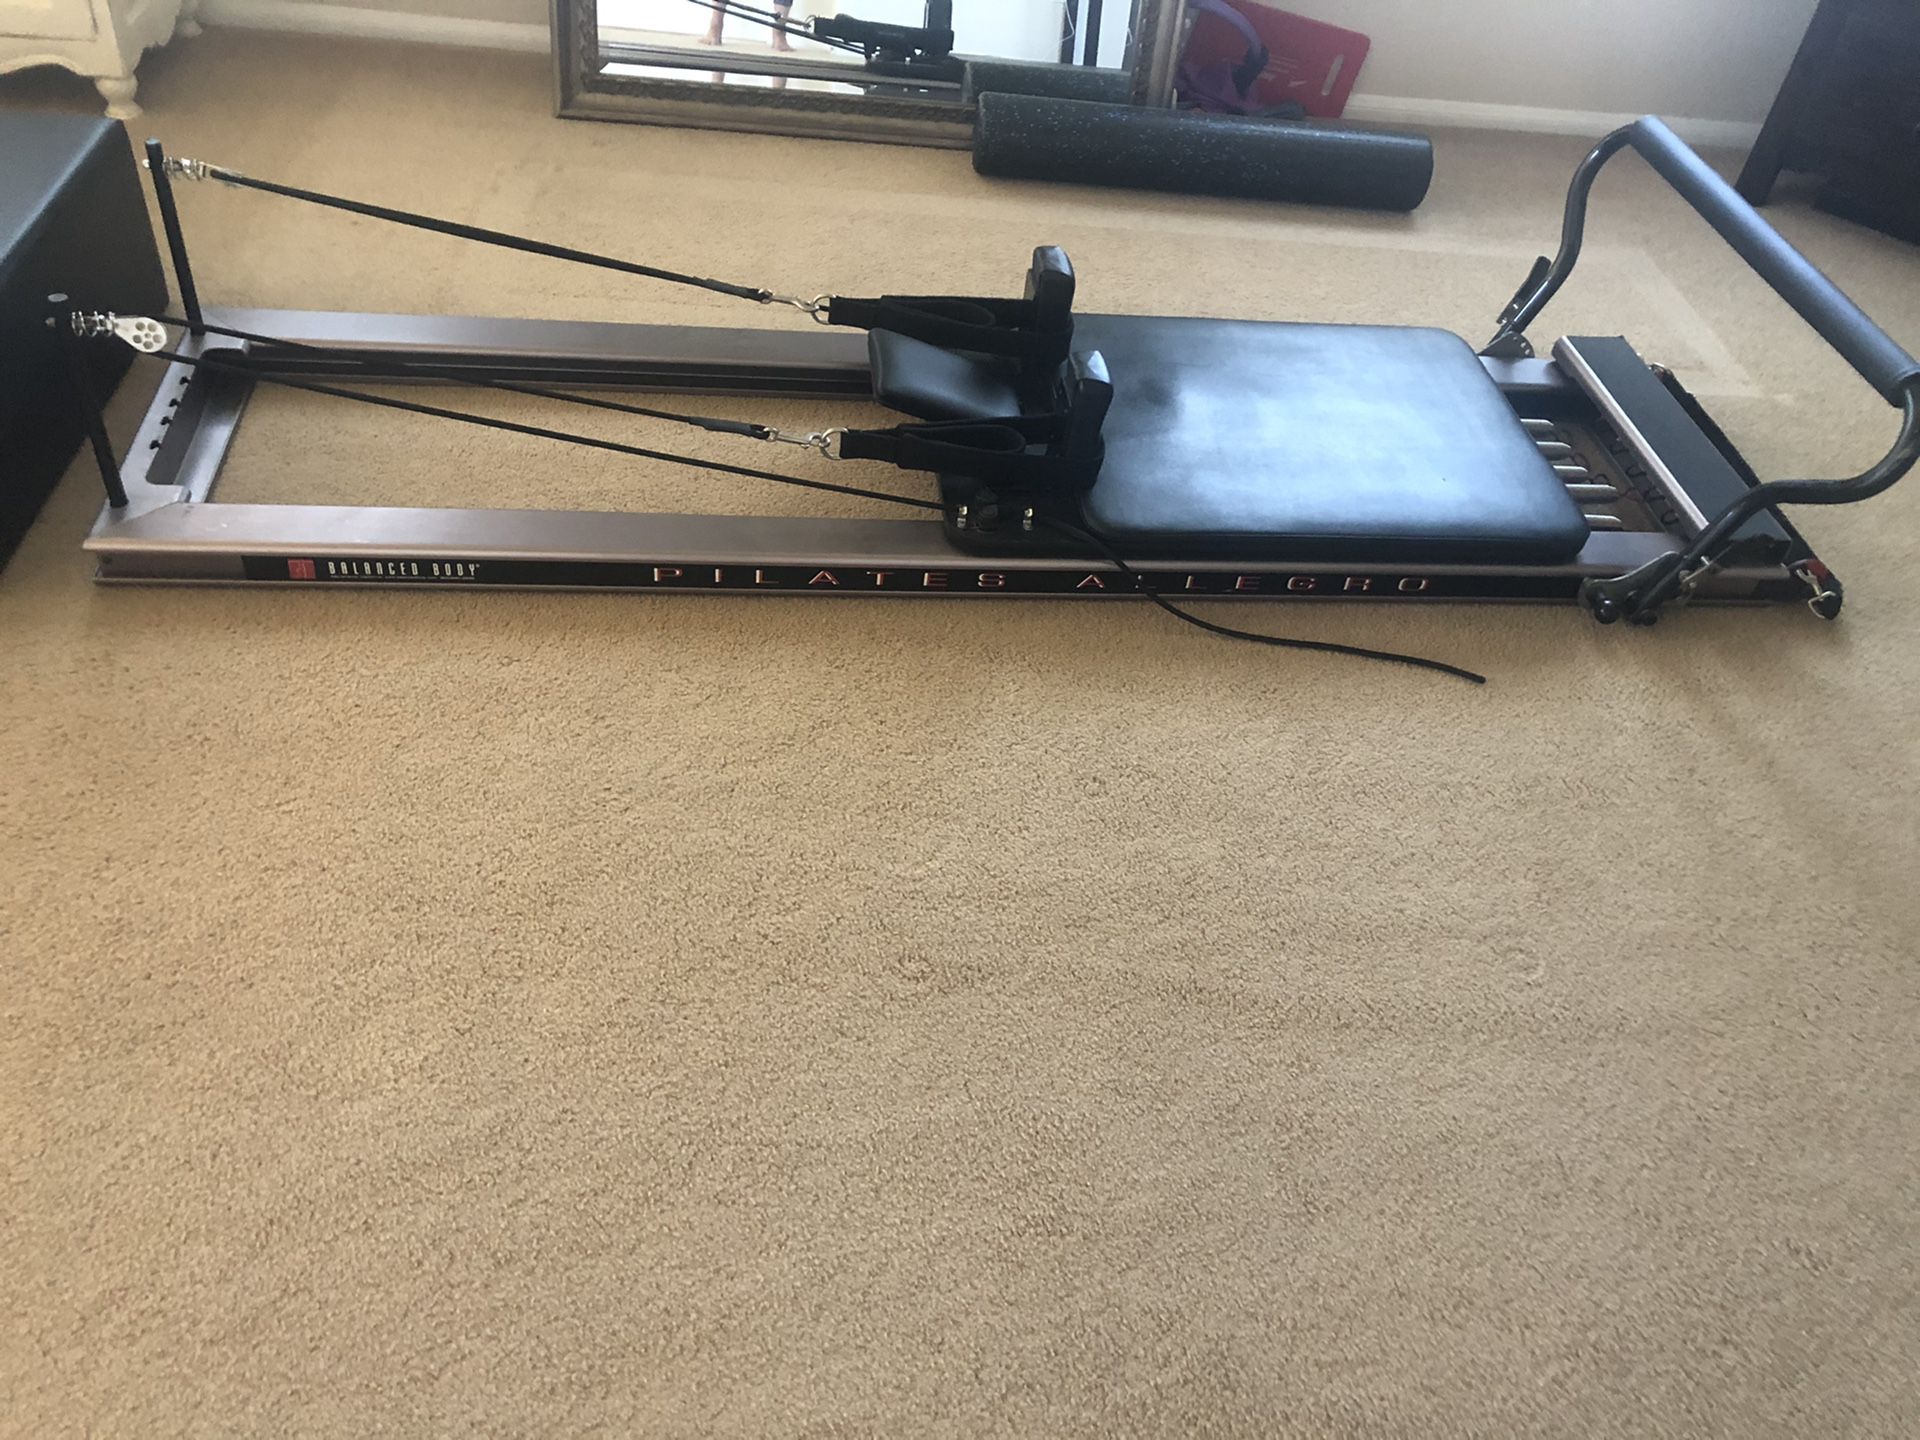 Balanced Body Allegro Reformer for Sale in Temecula, CA - OfferUp